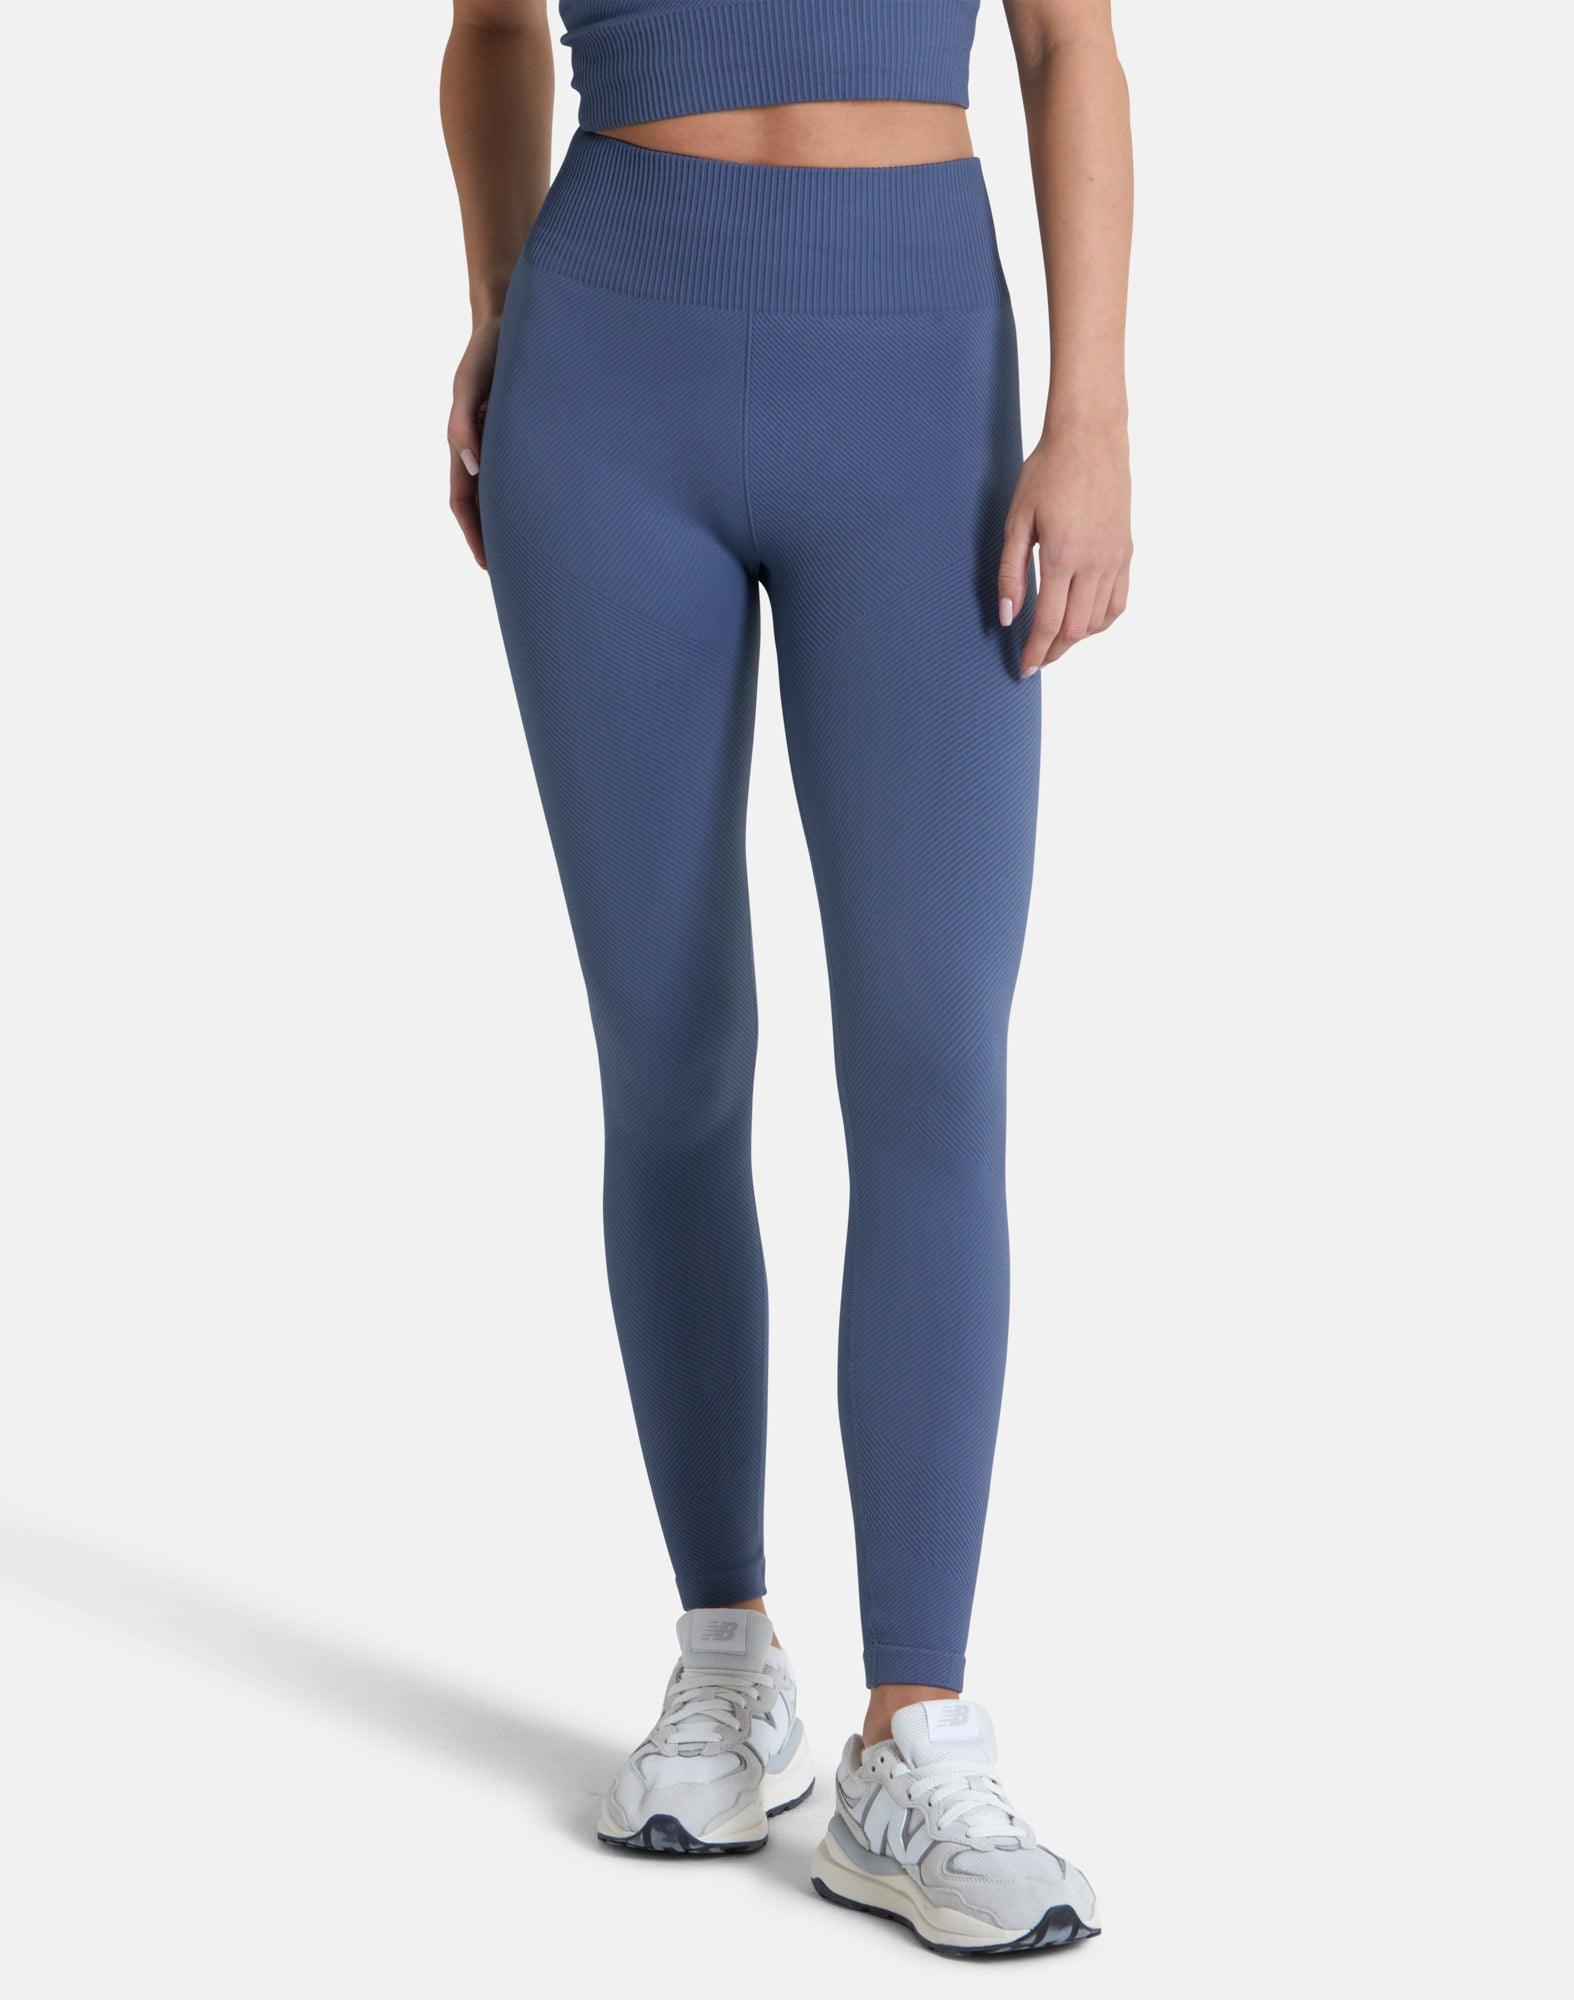 Seamless Blue Leggings  Products For Those With A Passion For Both Fitness  & Fashion